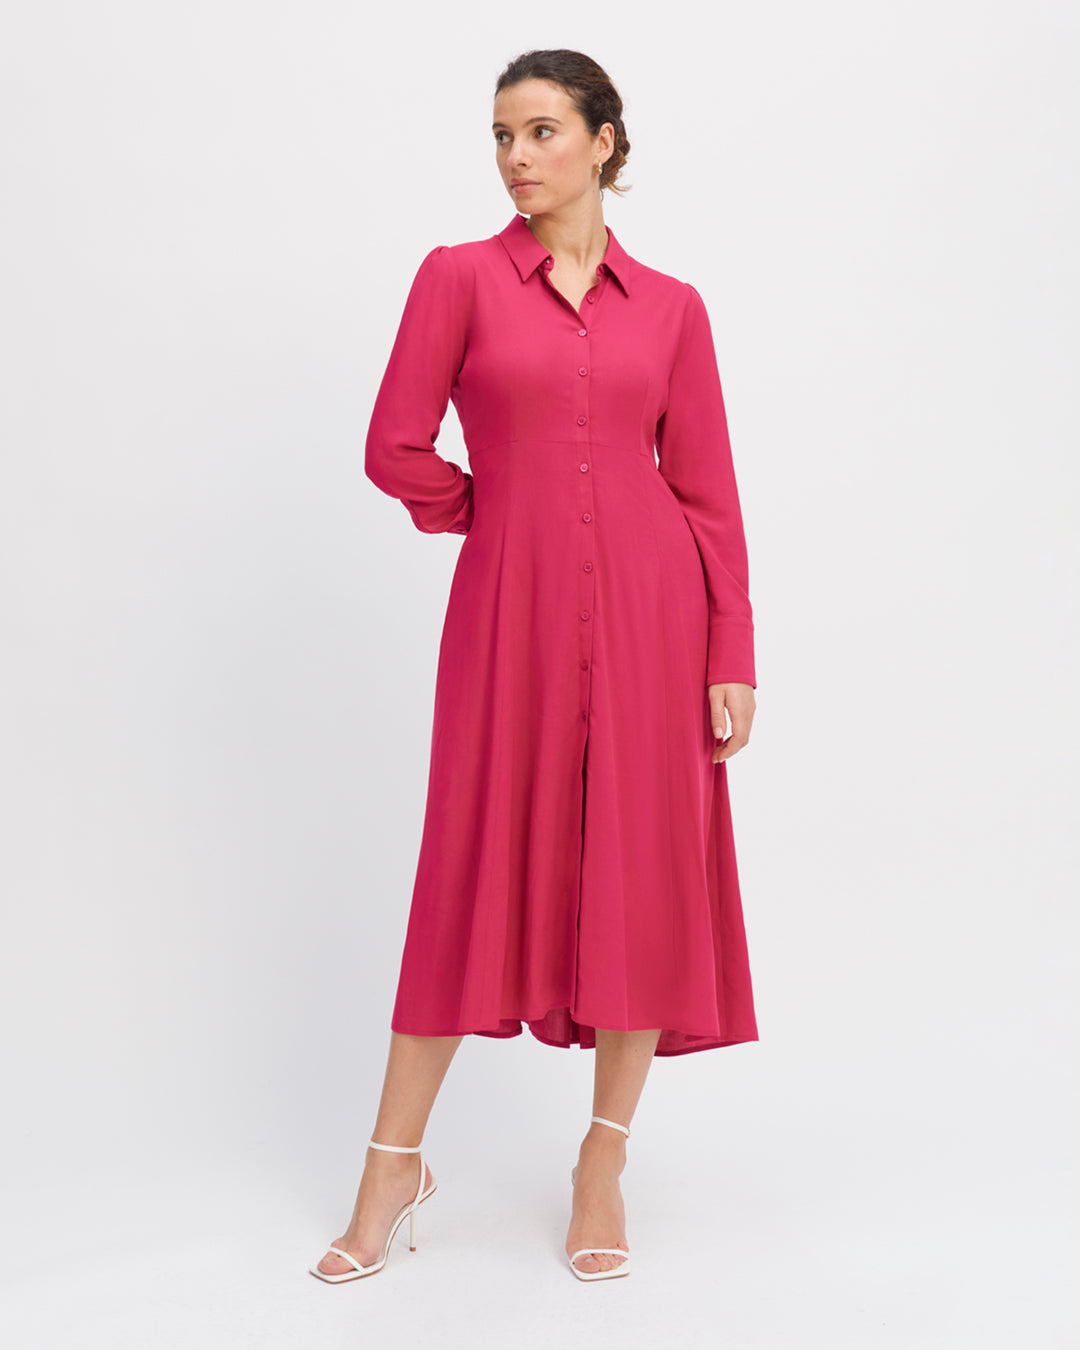 Dress-rose-Long-midday-Collar-blouse-Long-sleeves-with-buttoned-cuffs-Buttoned-flap-hidden-Curved-at-the-waist-17H10-tailors-for-women-paris-